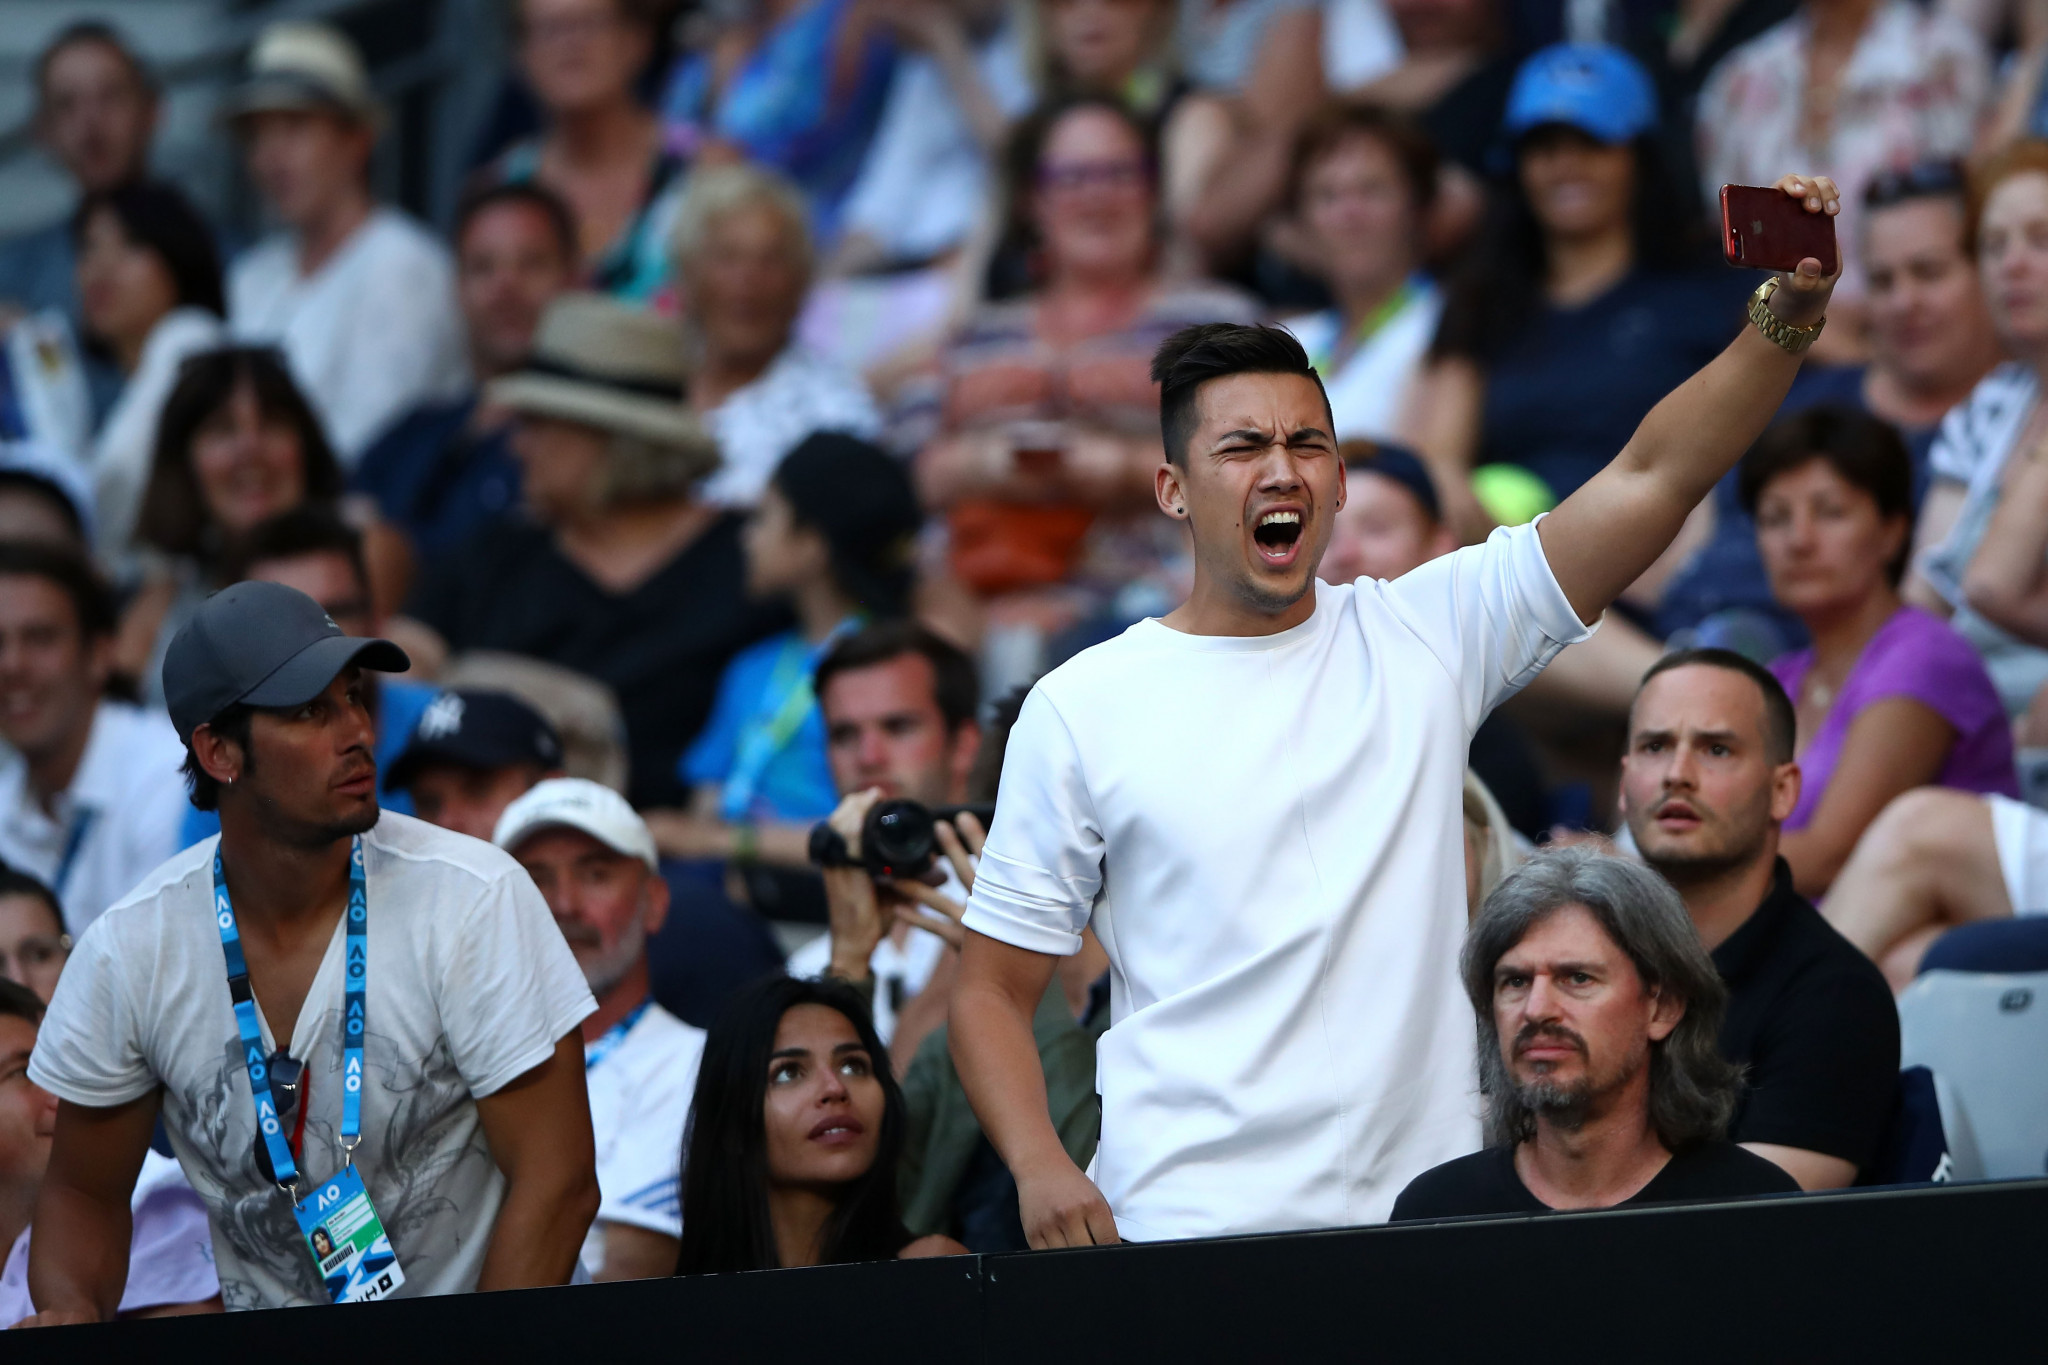 A spectator interrupts the second round match between Nick Kyrgios of Australia and Viktor Troicki of Serbia ©Getty Images